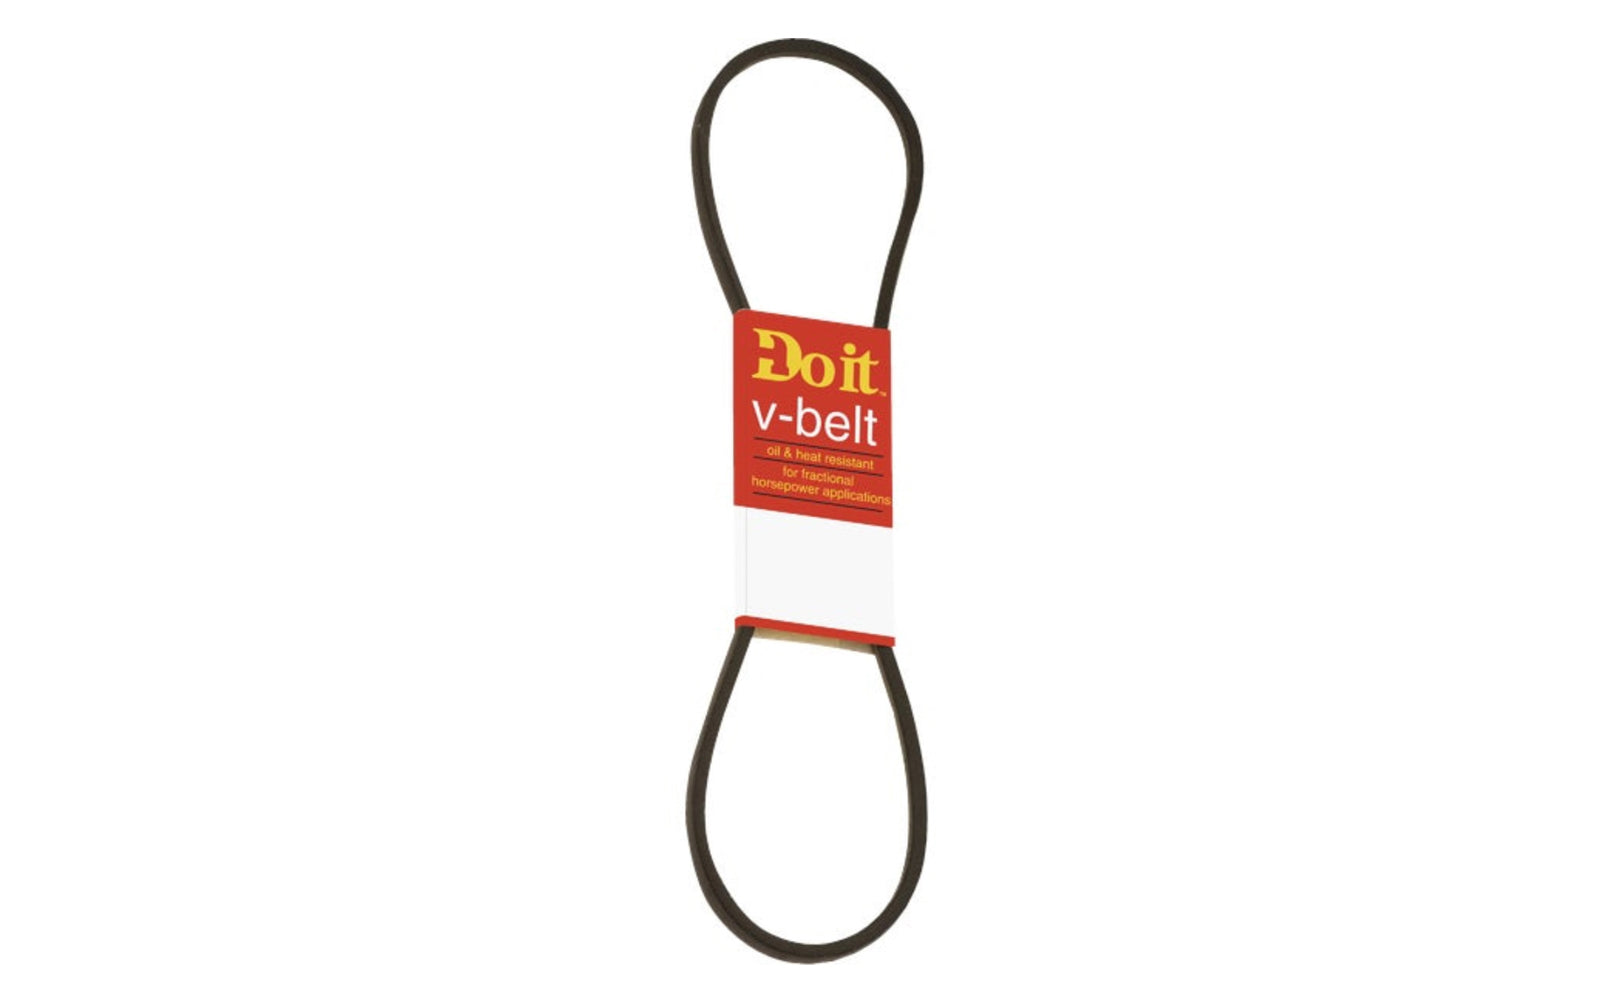 44" (1118 mm) Long x 1/2" (13 mm) Width Rubber V-Belt - 4L440. Oil & heat resistant. Recommended for 1-3 HP (horsepower) light-duty applications. Typically the best option for electric powered applications. For refrigerators, washing machines, pumps, stokers, woodworking machines. Pulley type: A-Pulley.